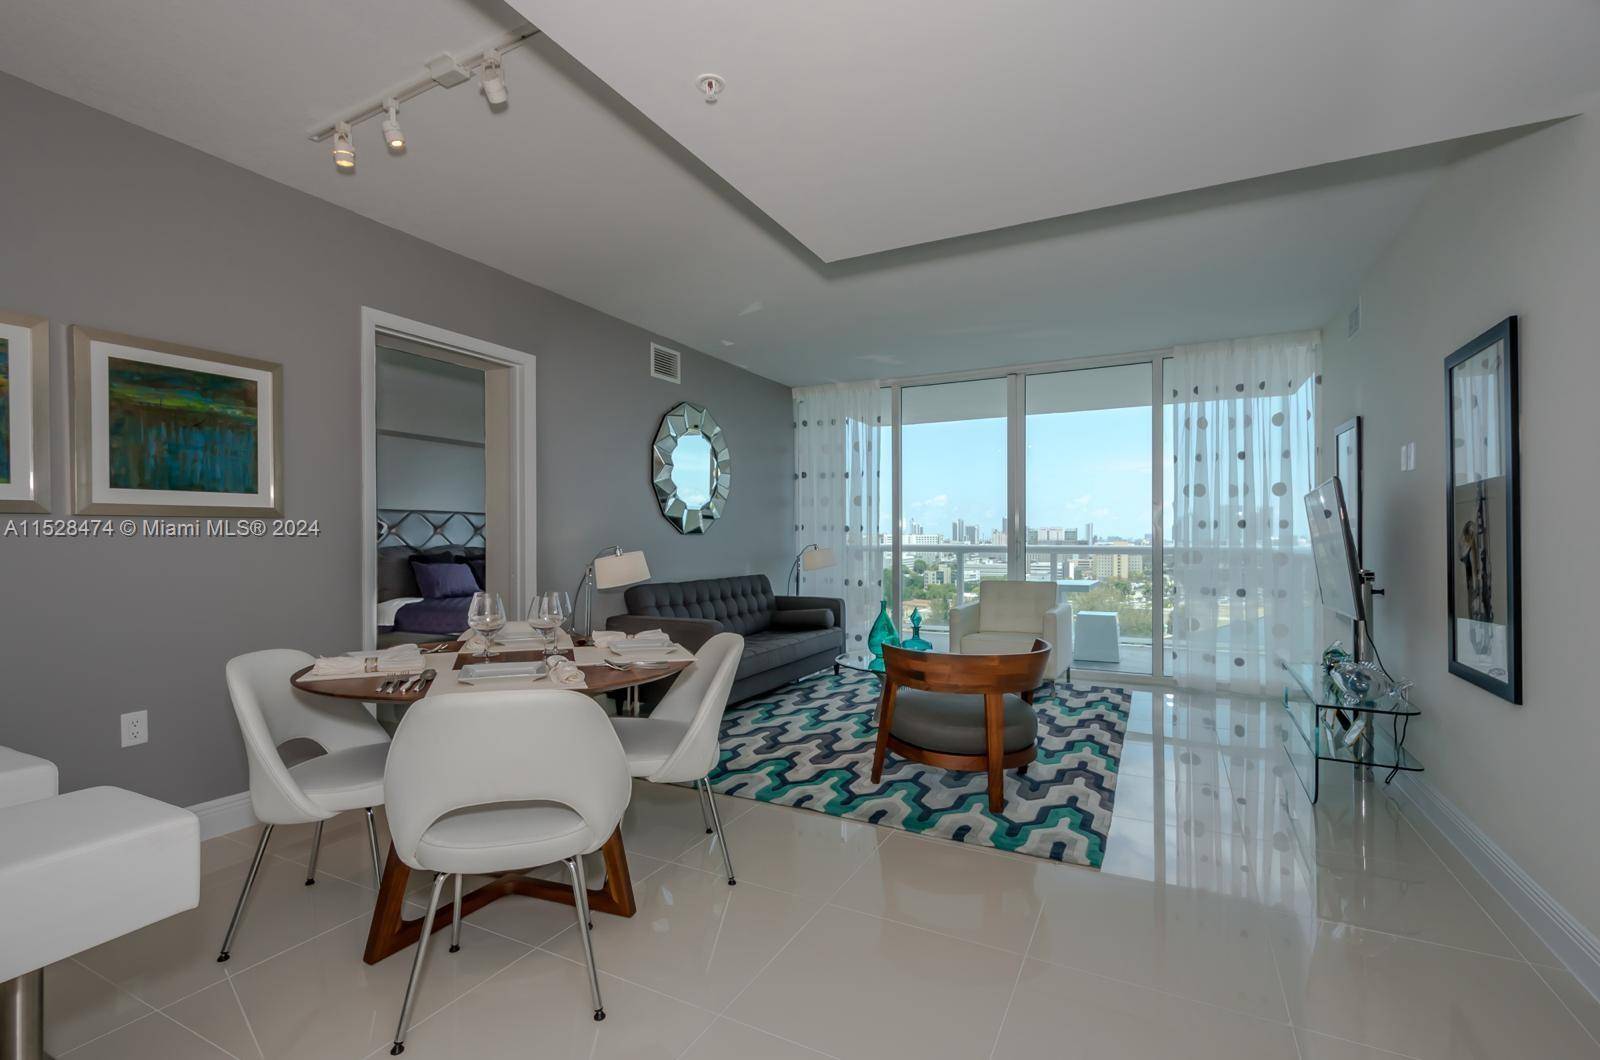 Luxury 1 bedroom Den 2 baths OPTION TO CLOSE DEN AND HAVE 2ND ROOM condo features open floor plan with spectacular bay and city views, spacious balcony, stainless steel kitchen ...